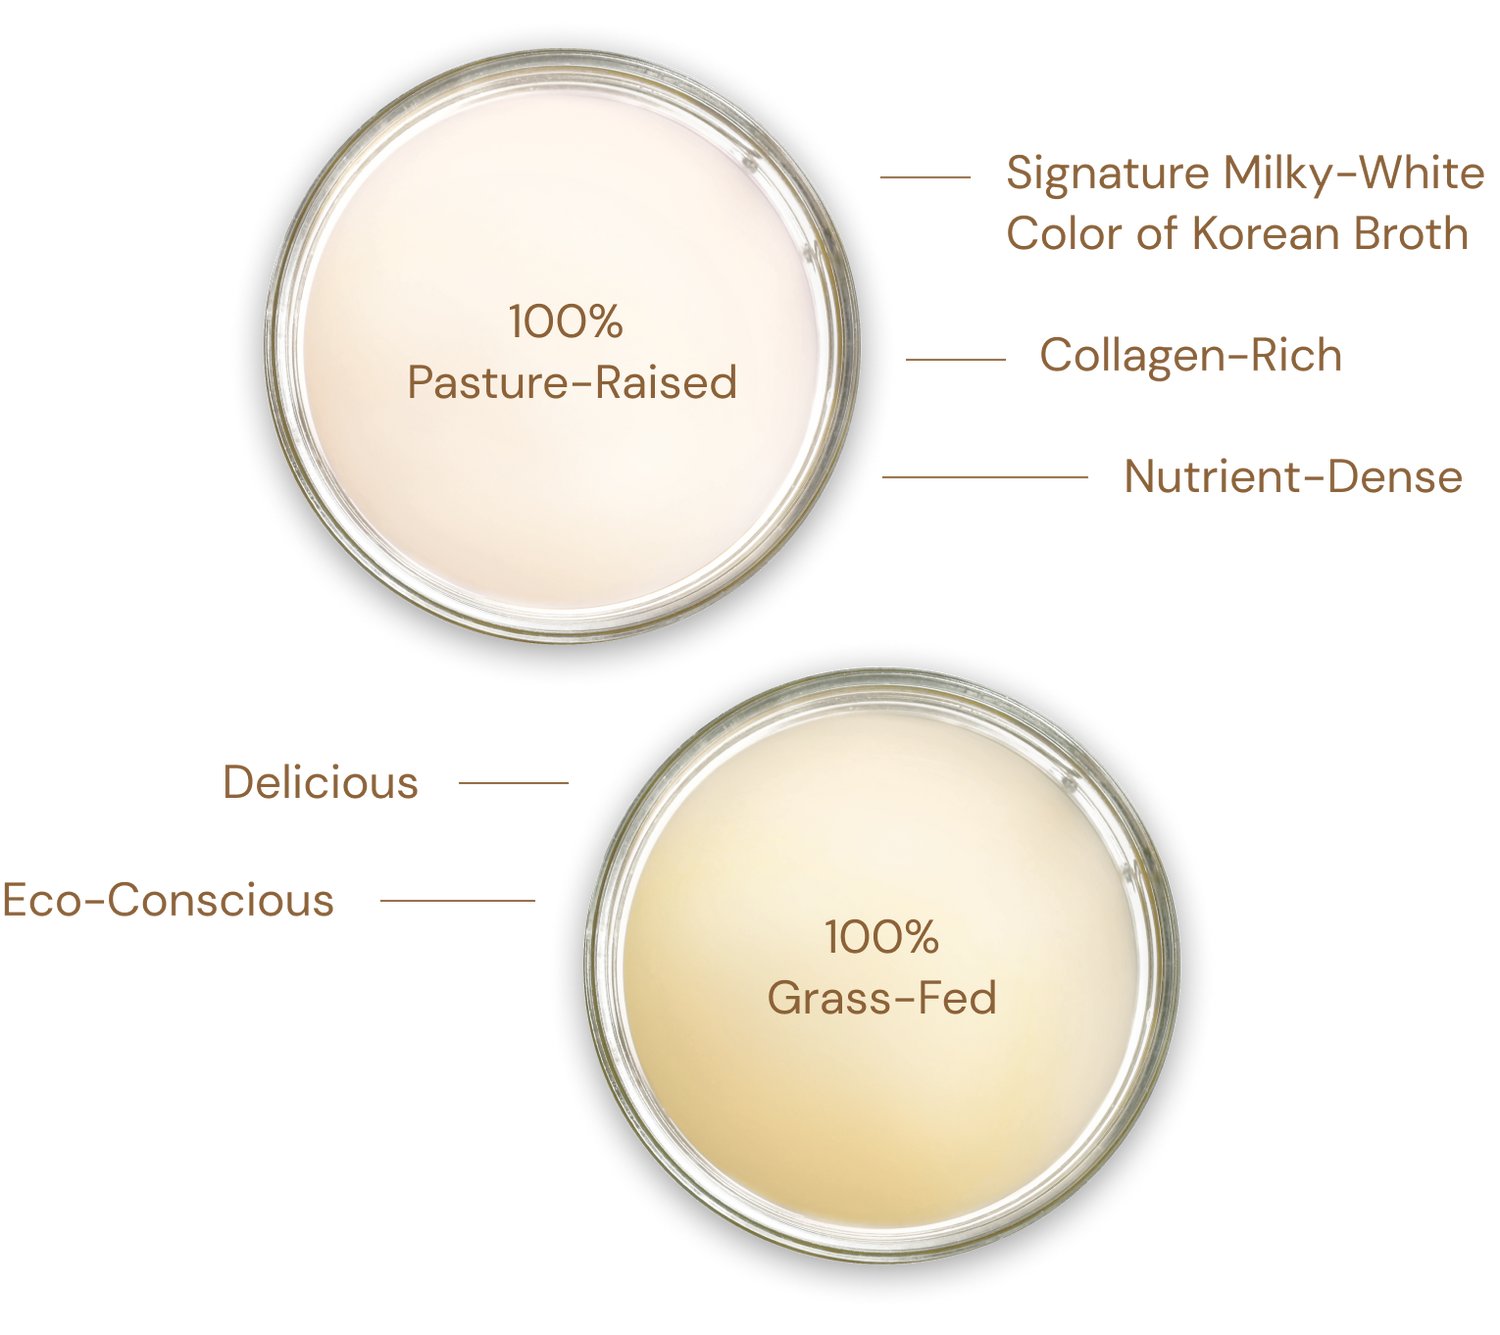 Image of 100% pasture-raised pork broth and 100% grass-fed beef broth in glasses with callouts of their benefits, including signature milky-white color of Korean broth, collagen-rich, nutrient-dense, delicious, and eco-conscious